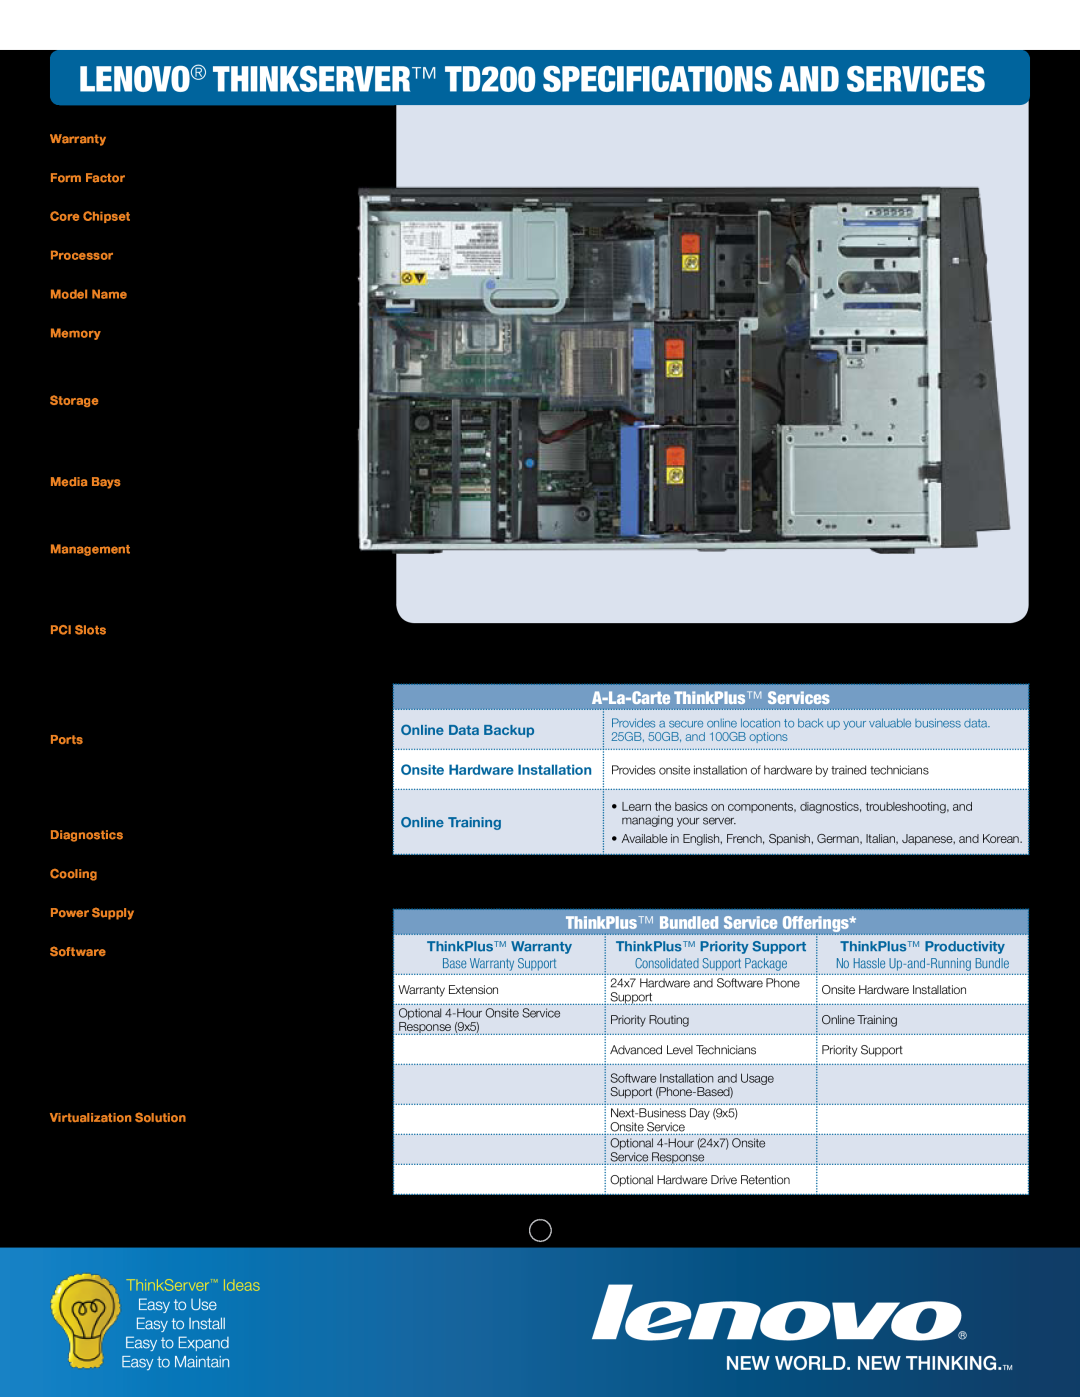 Lenovo Lenovo ThinkServer TD200 Specifications and Services, A-La-Carte ThinkPlus Services, ThinkPlus Priority Support 